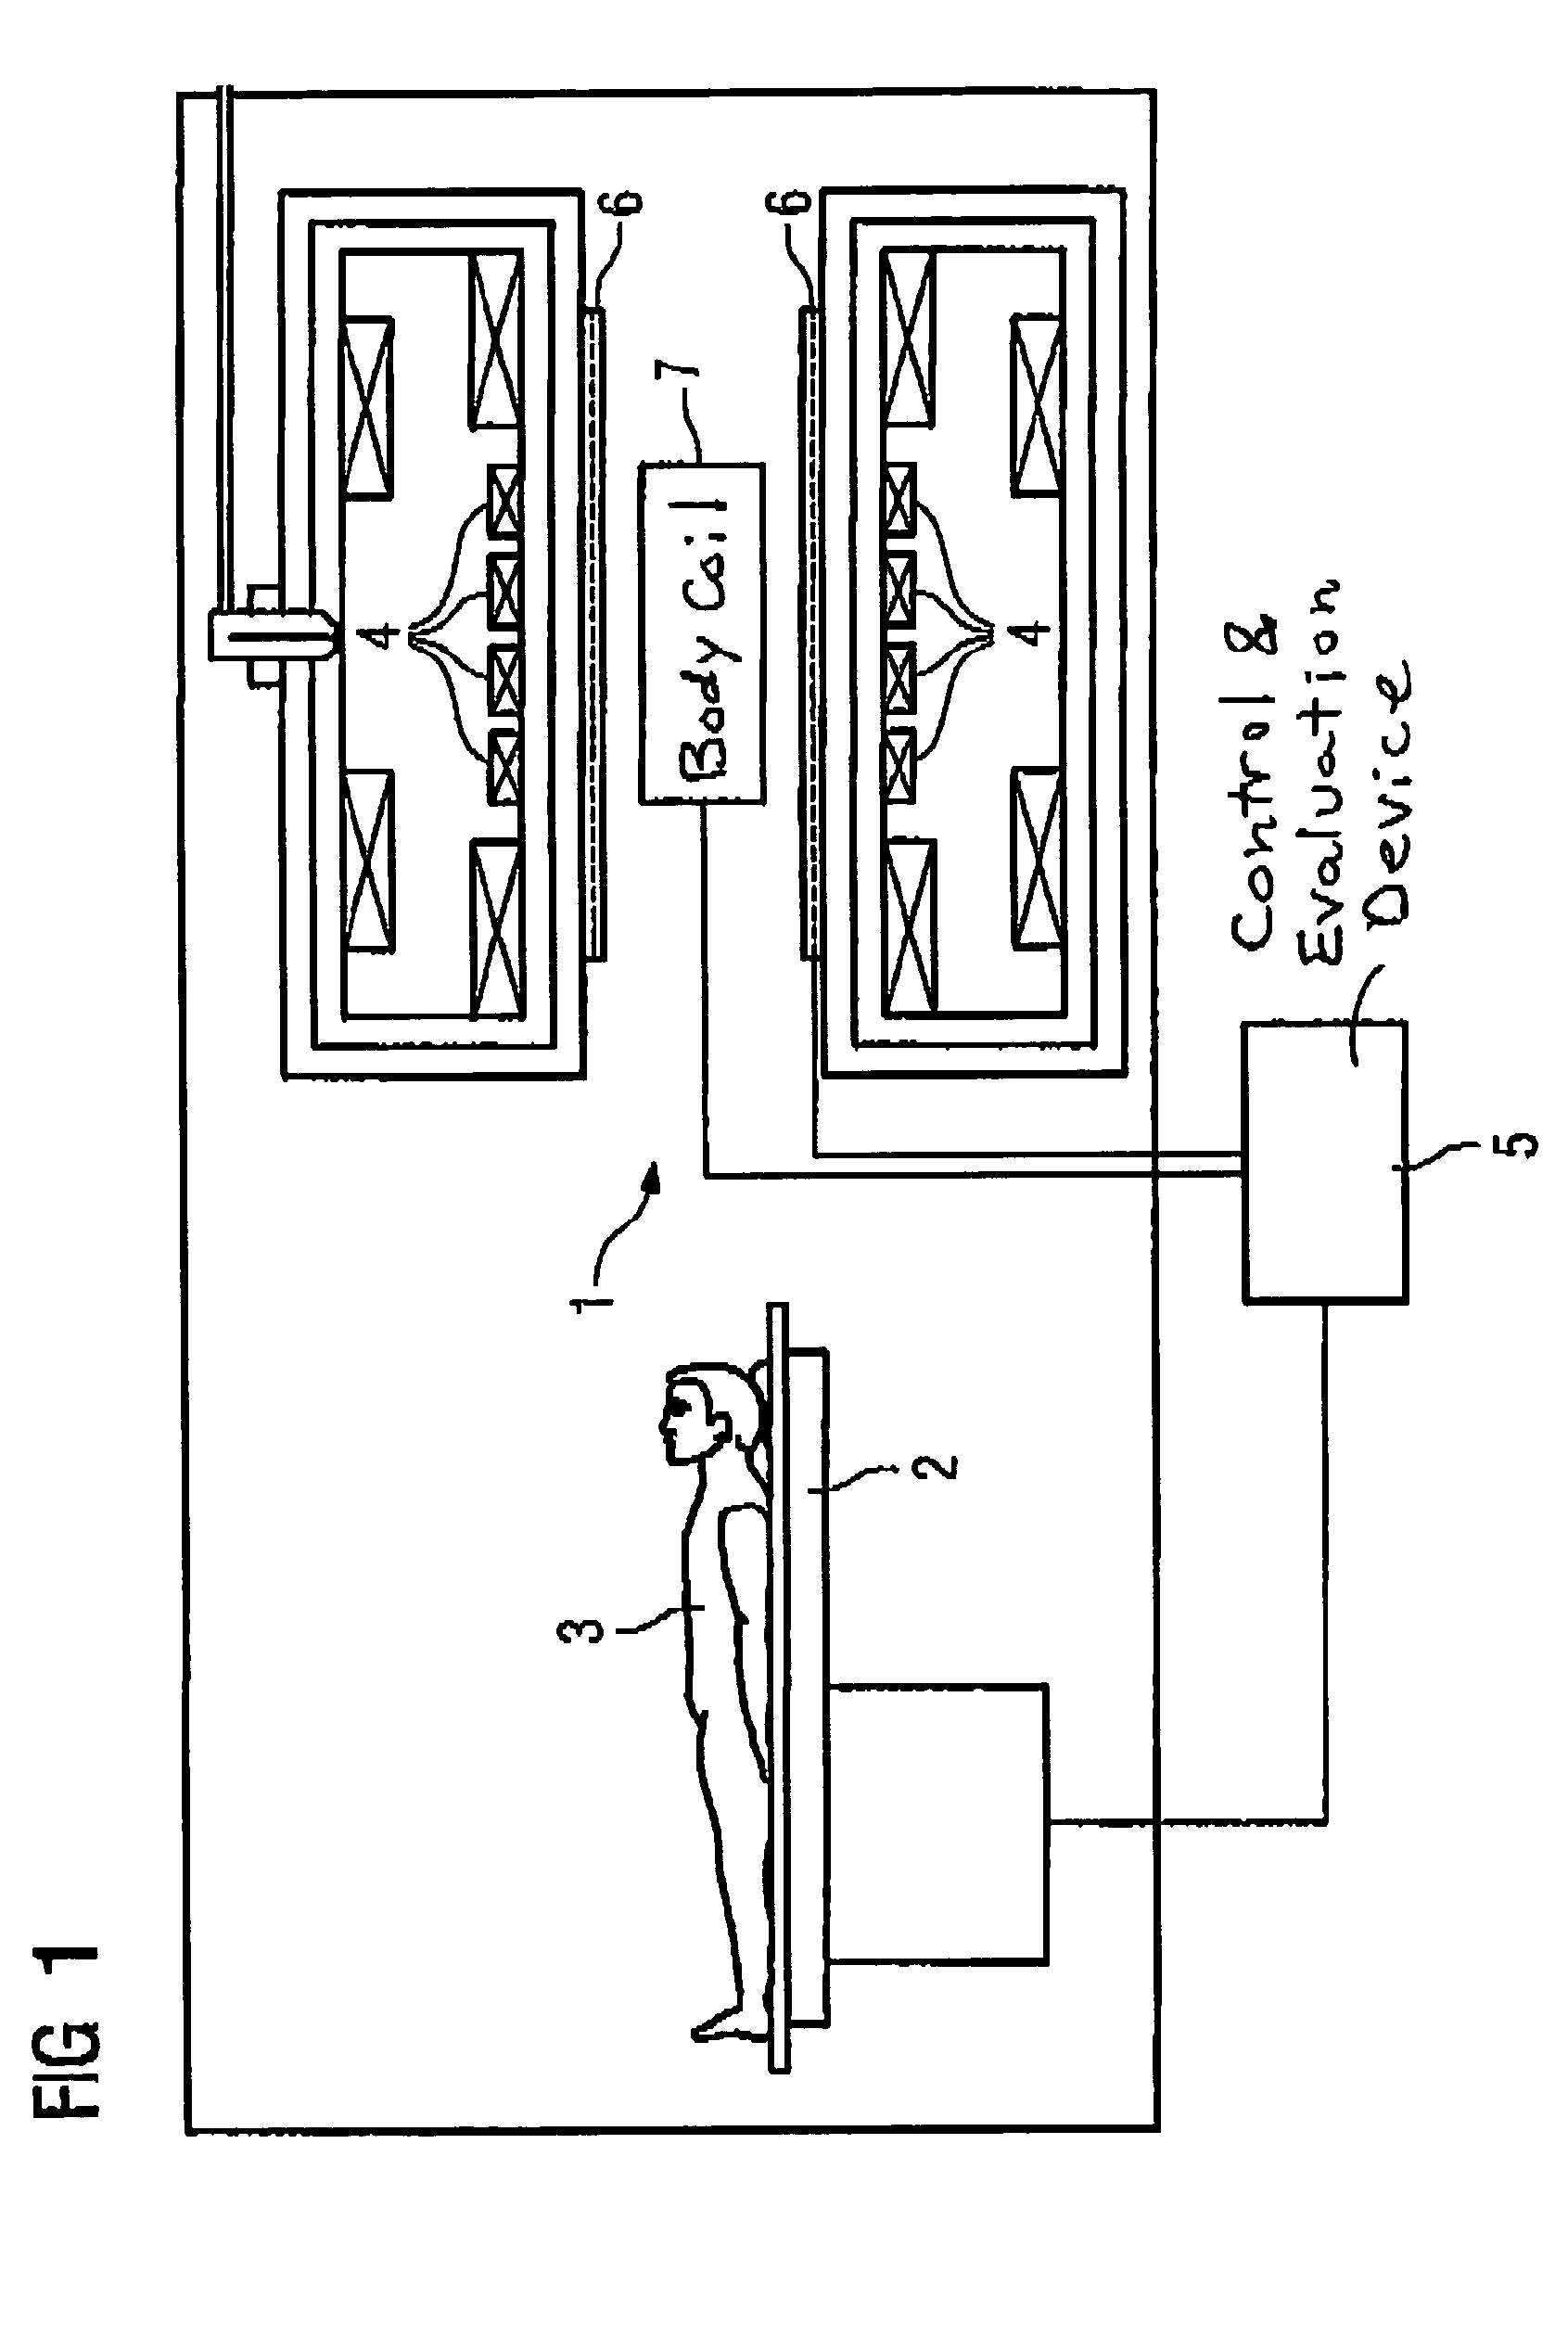 Magnetic resonance apparatus and operating method for generating a homogenous RF field in the examination volume